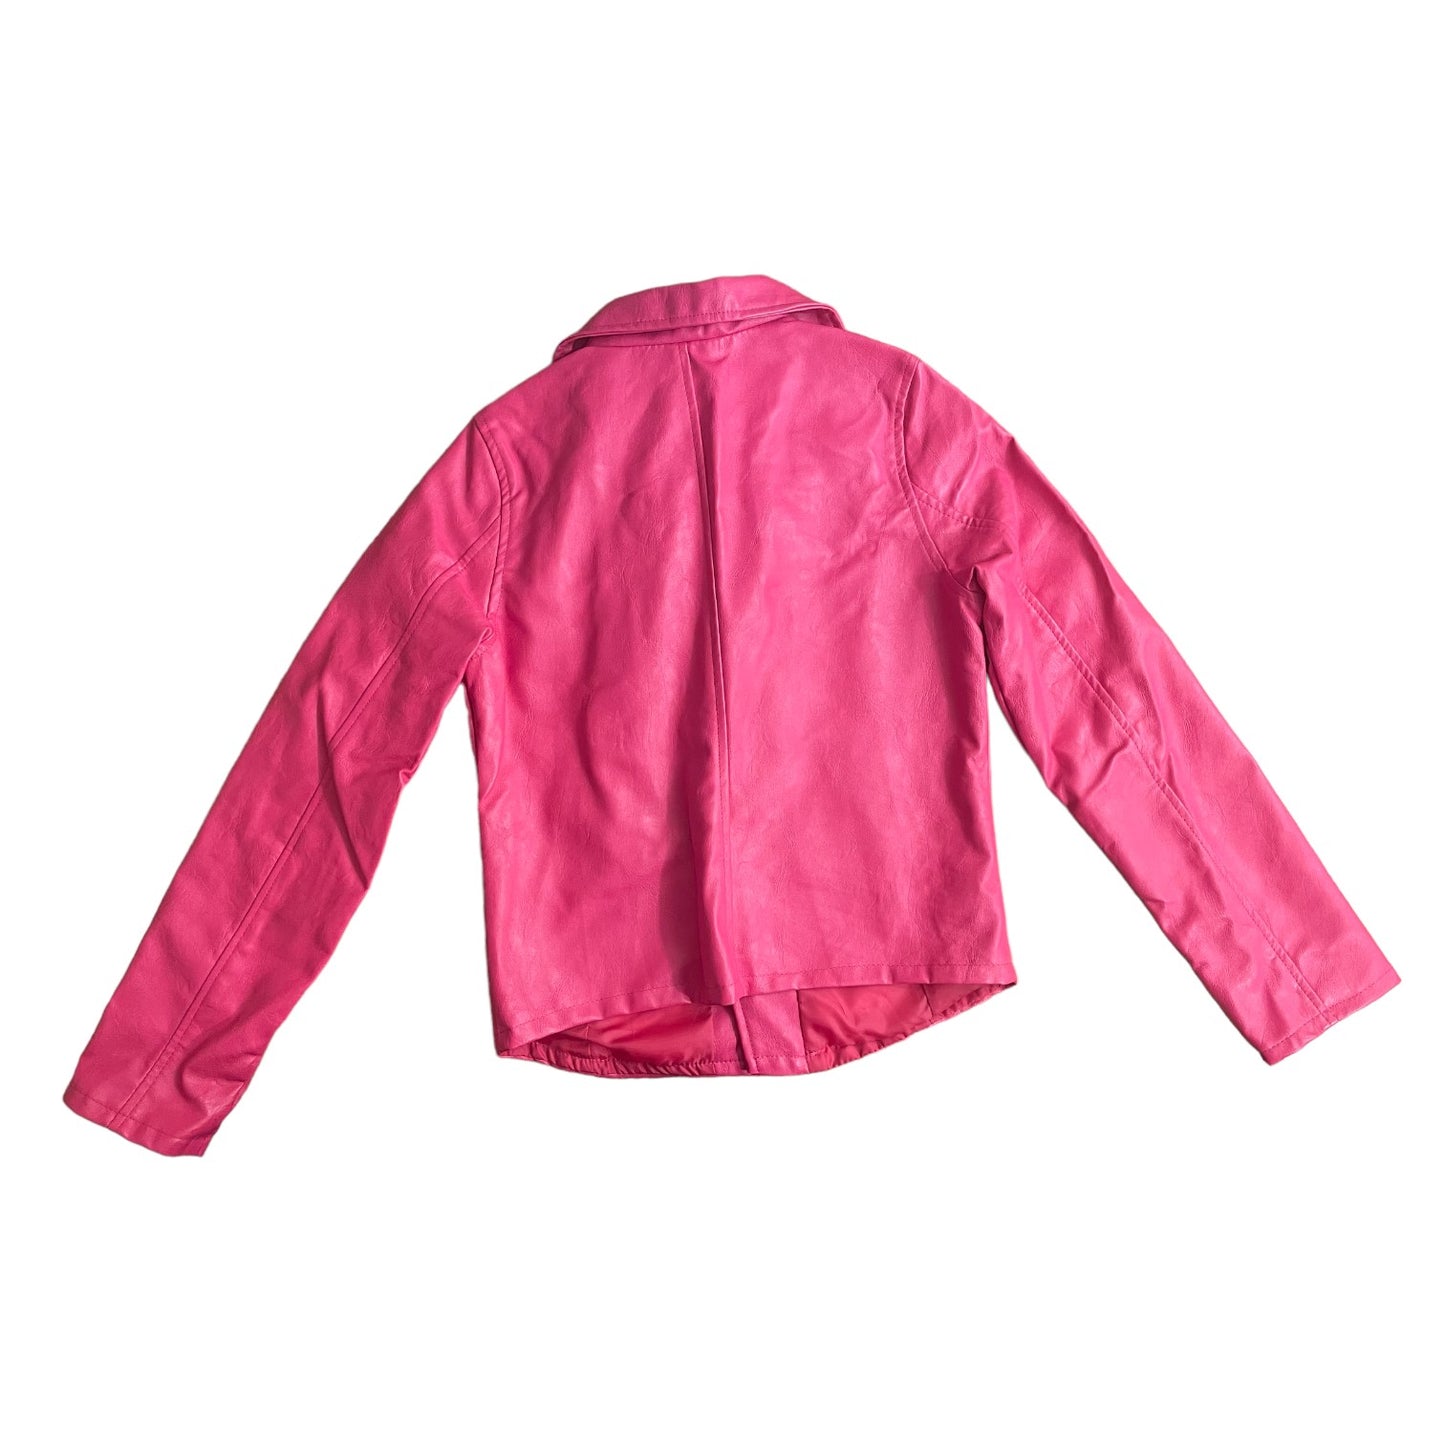 Place Faux Leather Girls Jacket